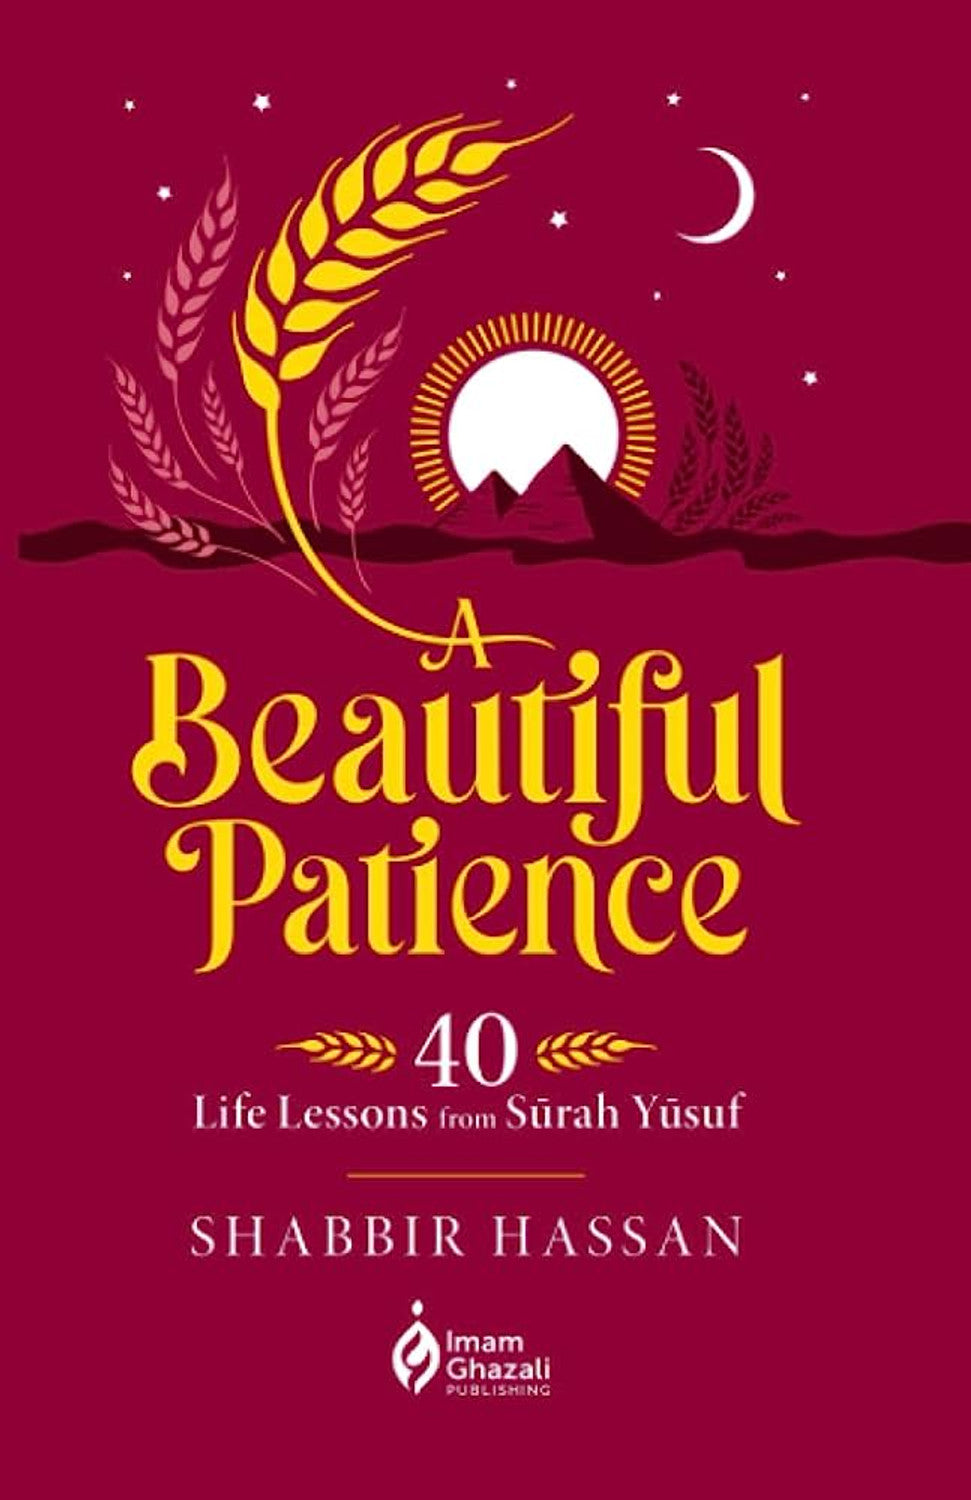 A Beautiful Patience 40 Live kessons from Surah Yusuf